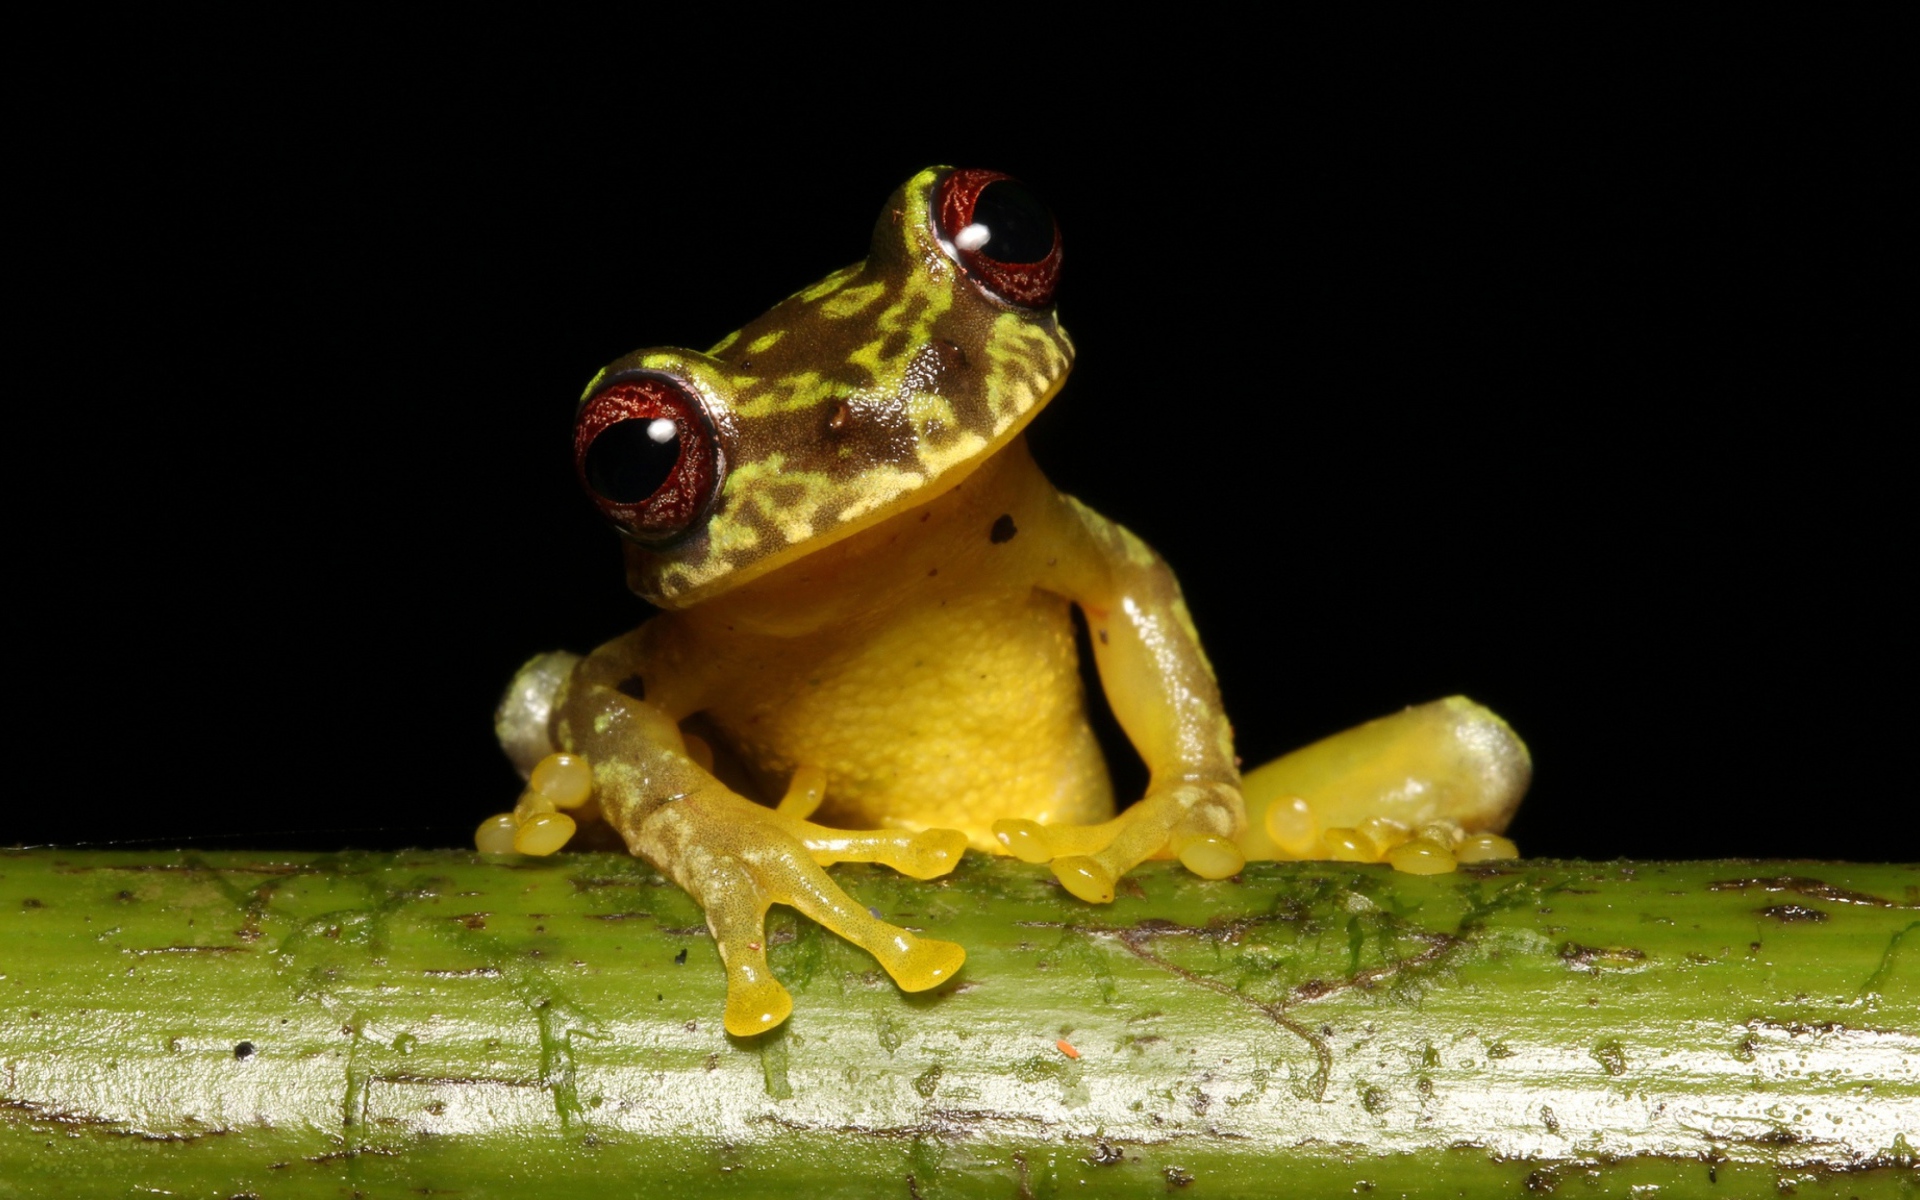 A funny frog is sitting on a green branch on a black background